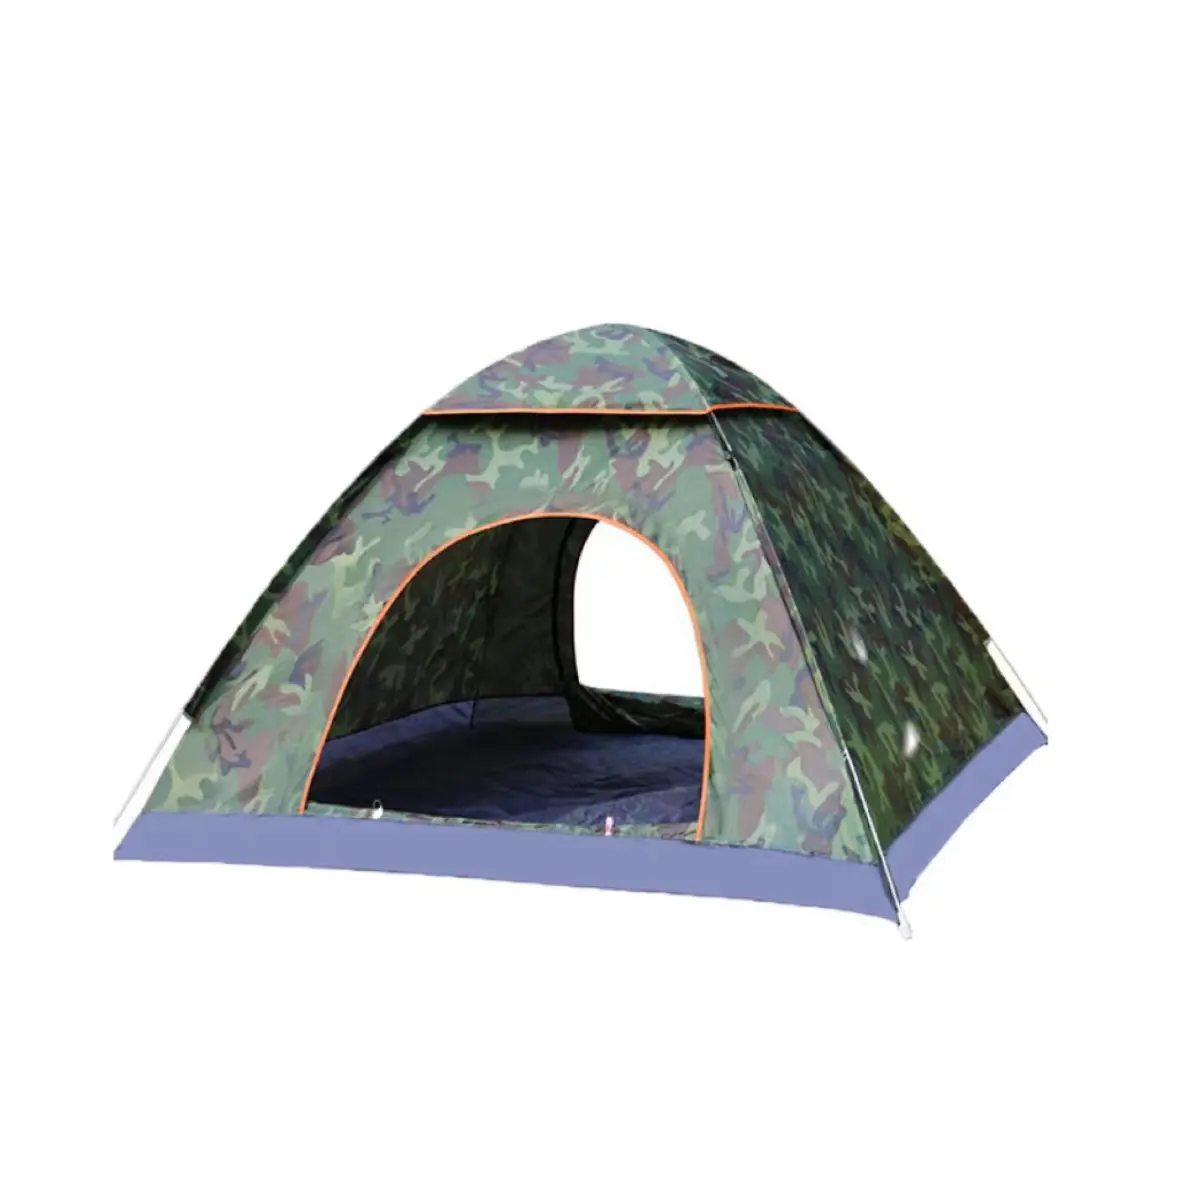 Amber Sport Hiking Fishing Tent Lightweight Folding Canopy Tent Portable Beach Tent for Outdoor